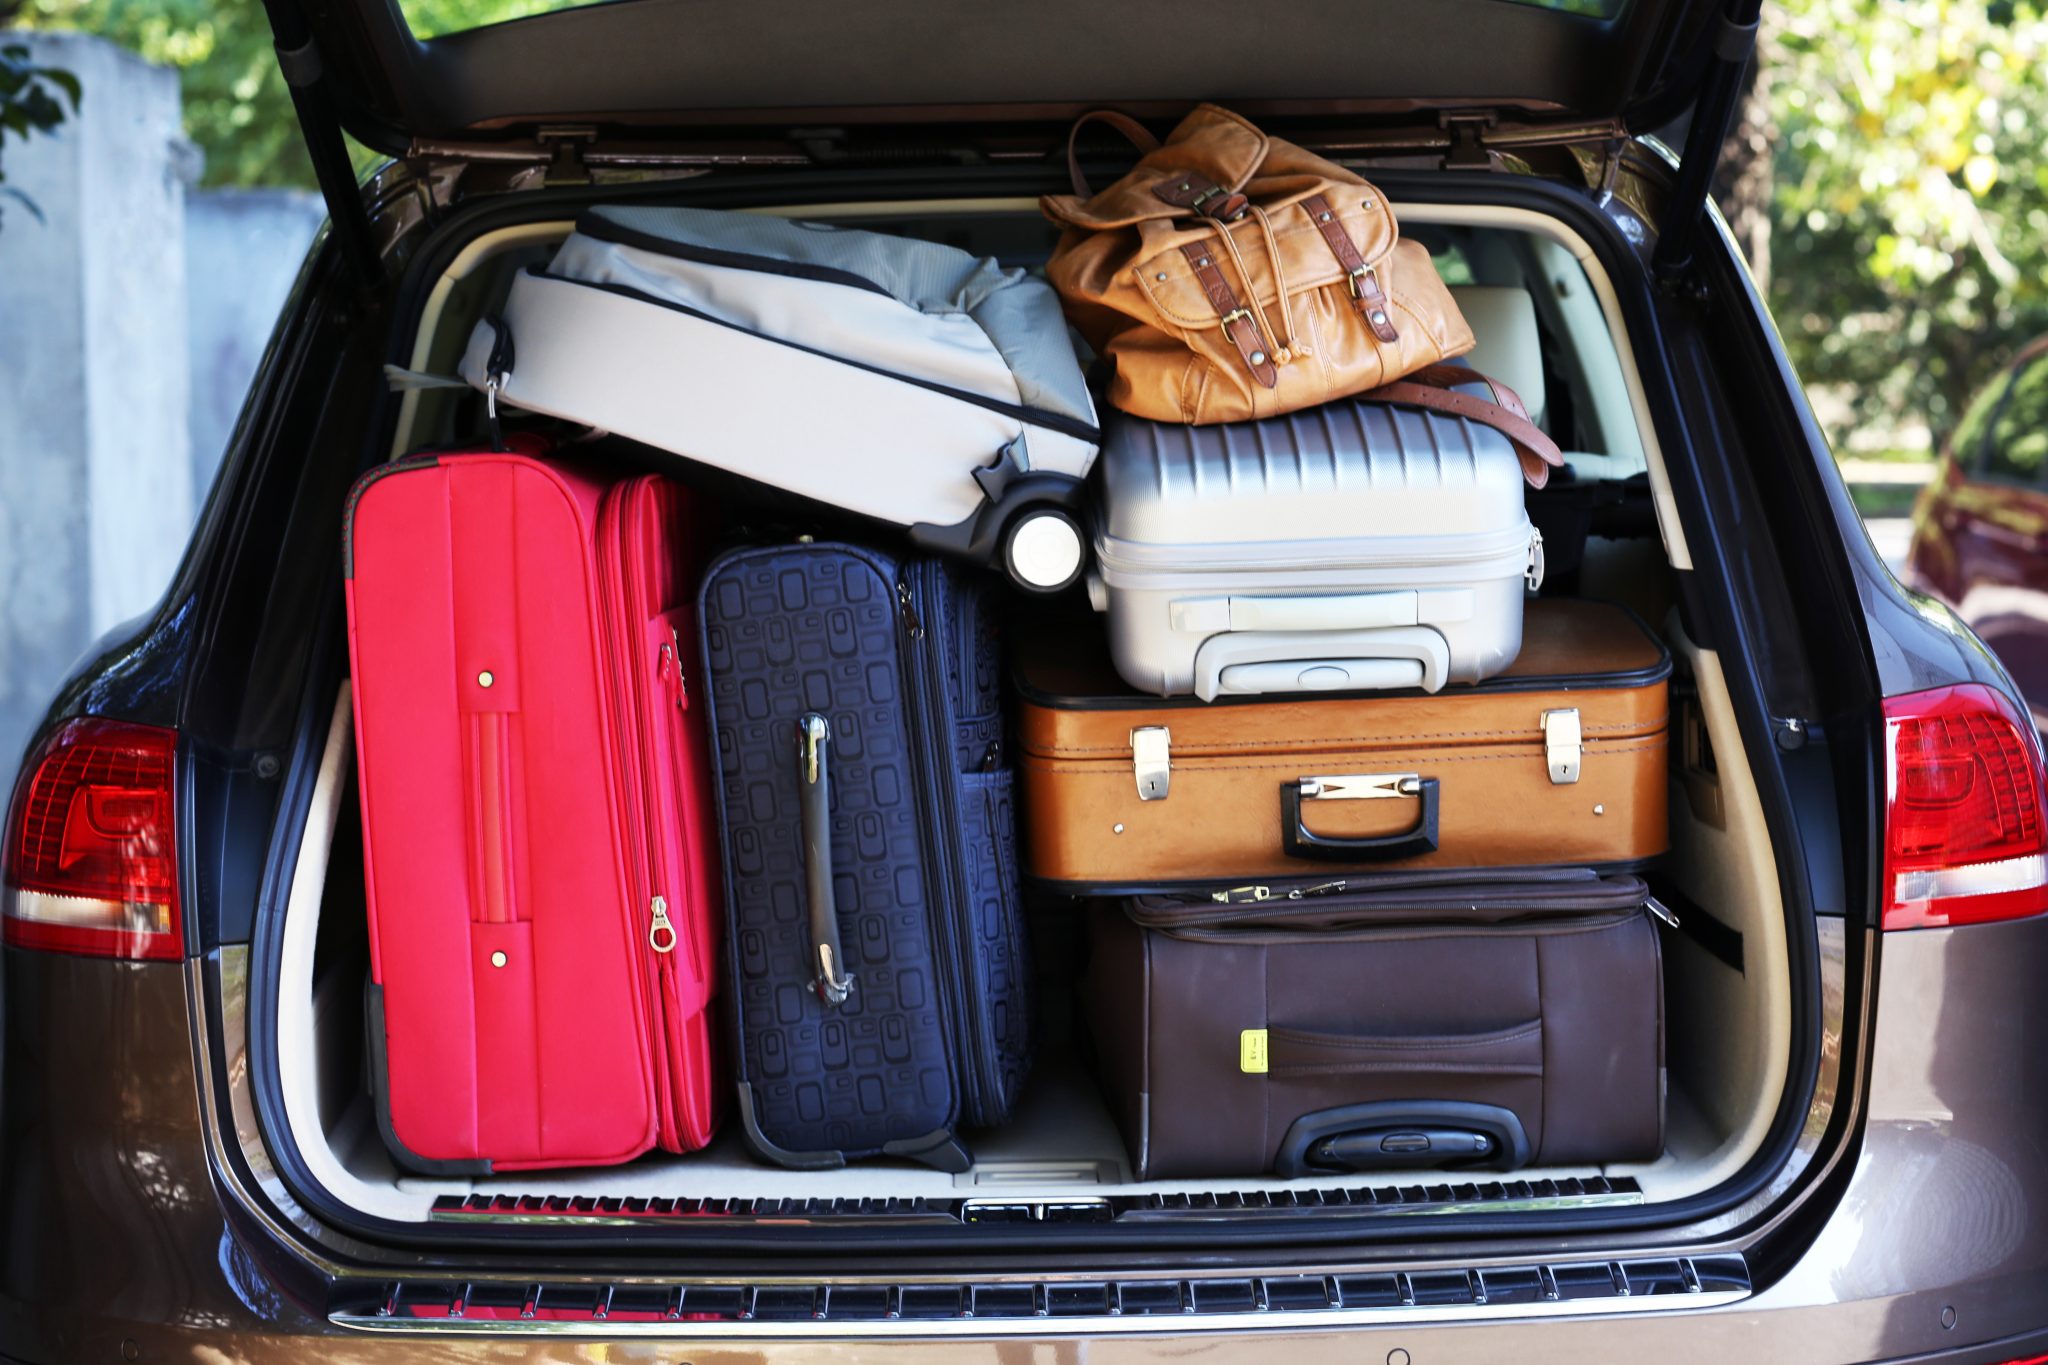 suitcases and bags in the trunk of the car